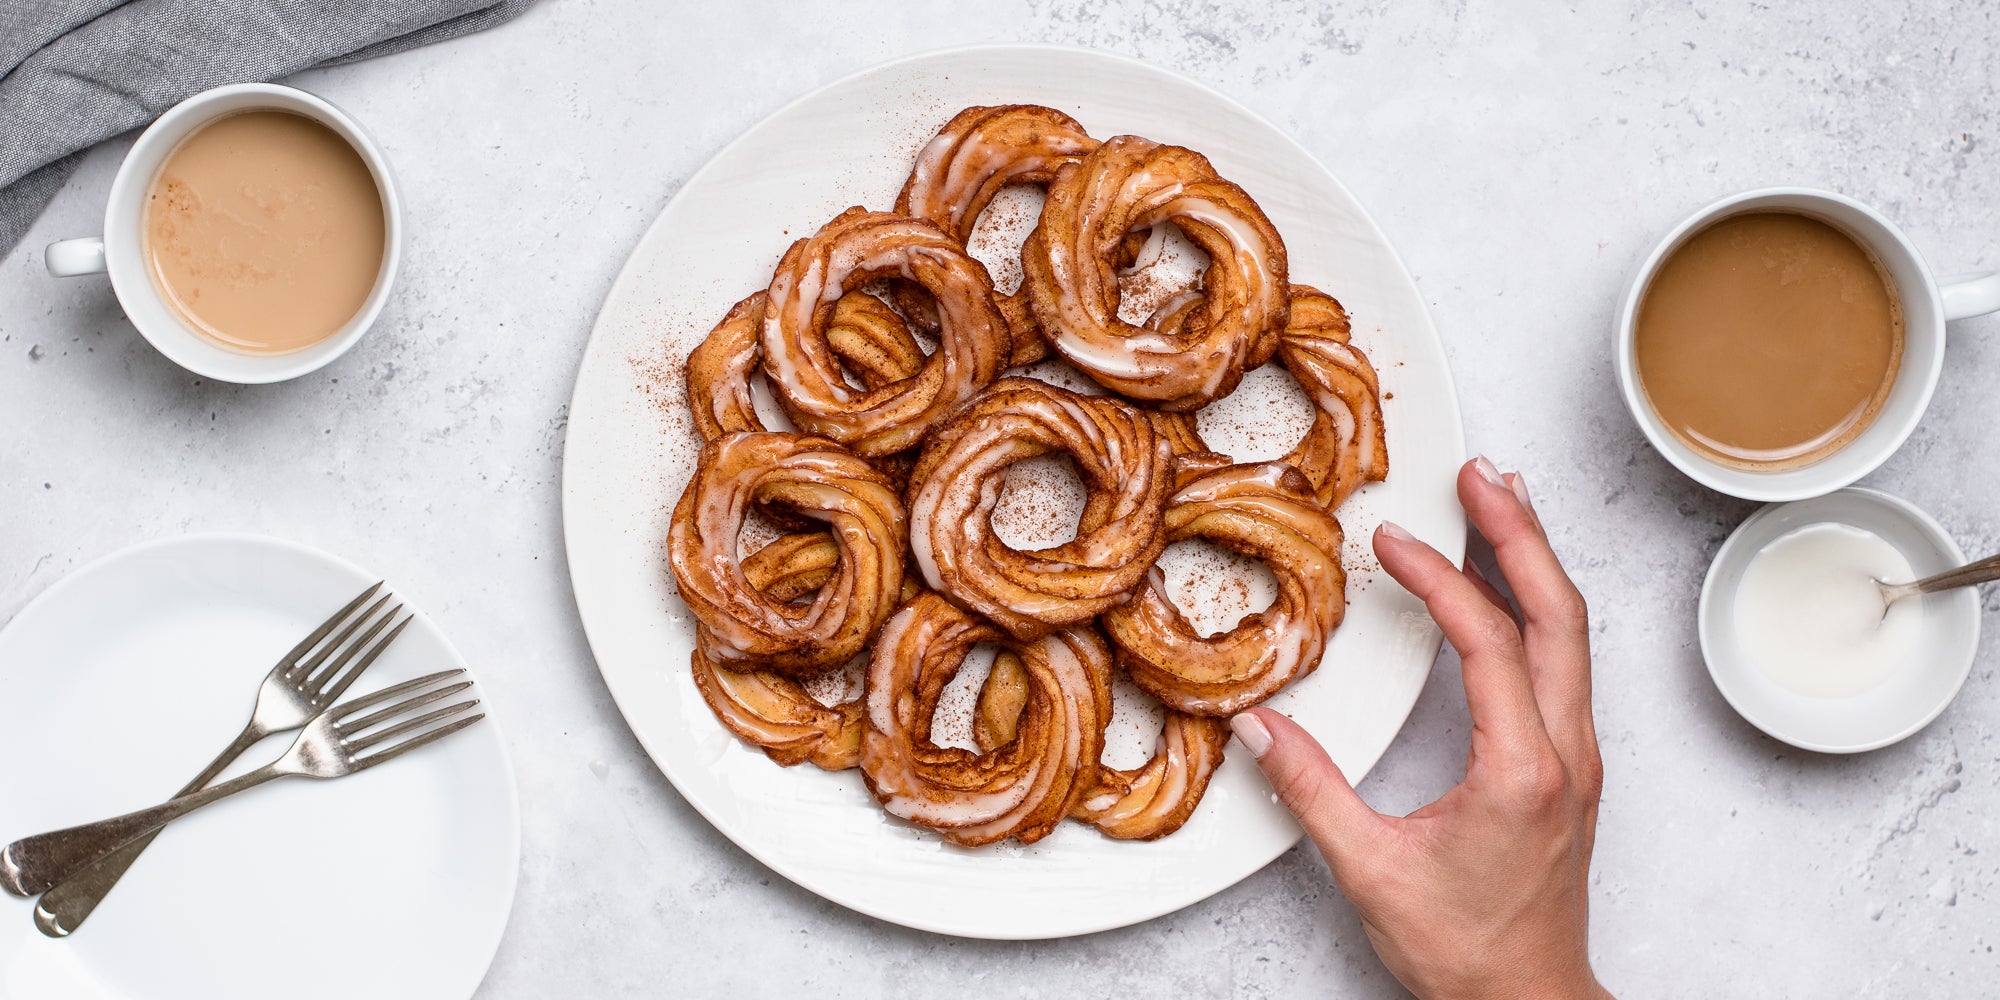 Top view of a plate of Apple Cider Crullers, with a hand reaching to pick one. Next to cups of tea, and a plate with forks ready to serve